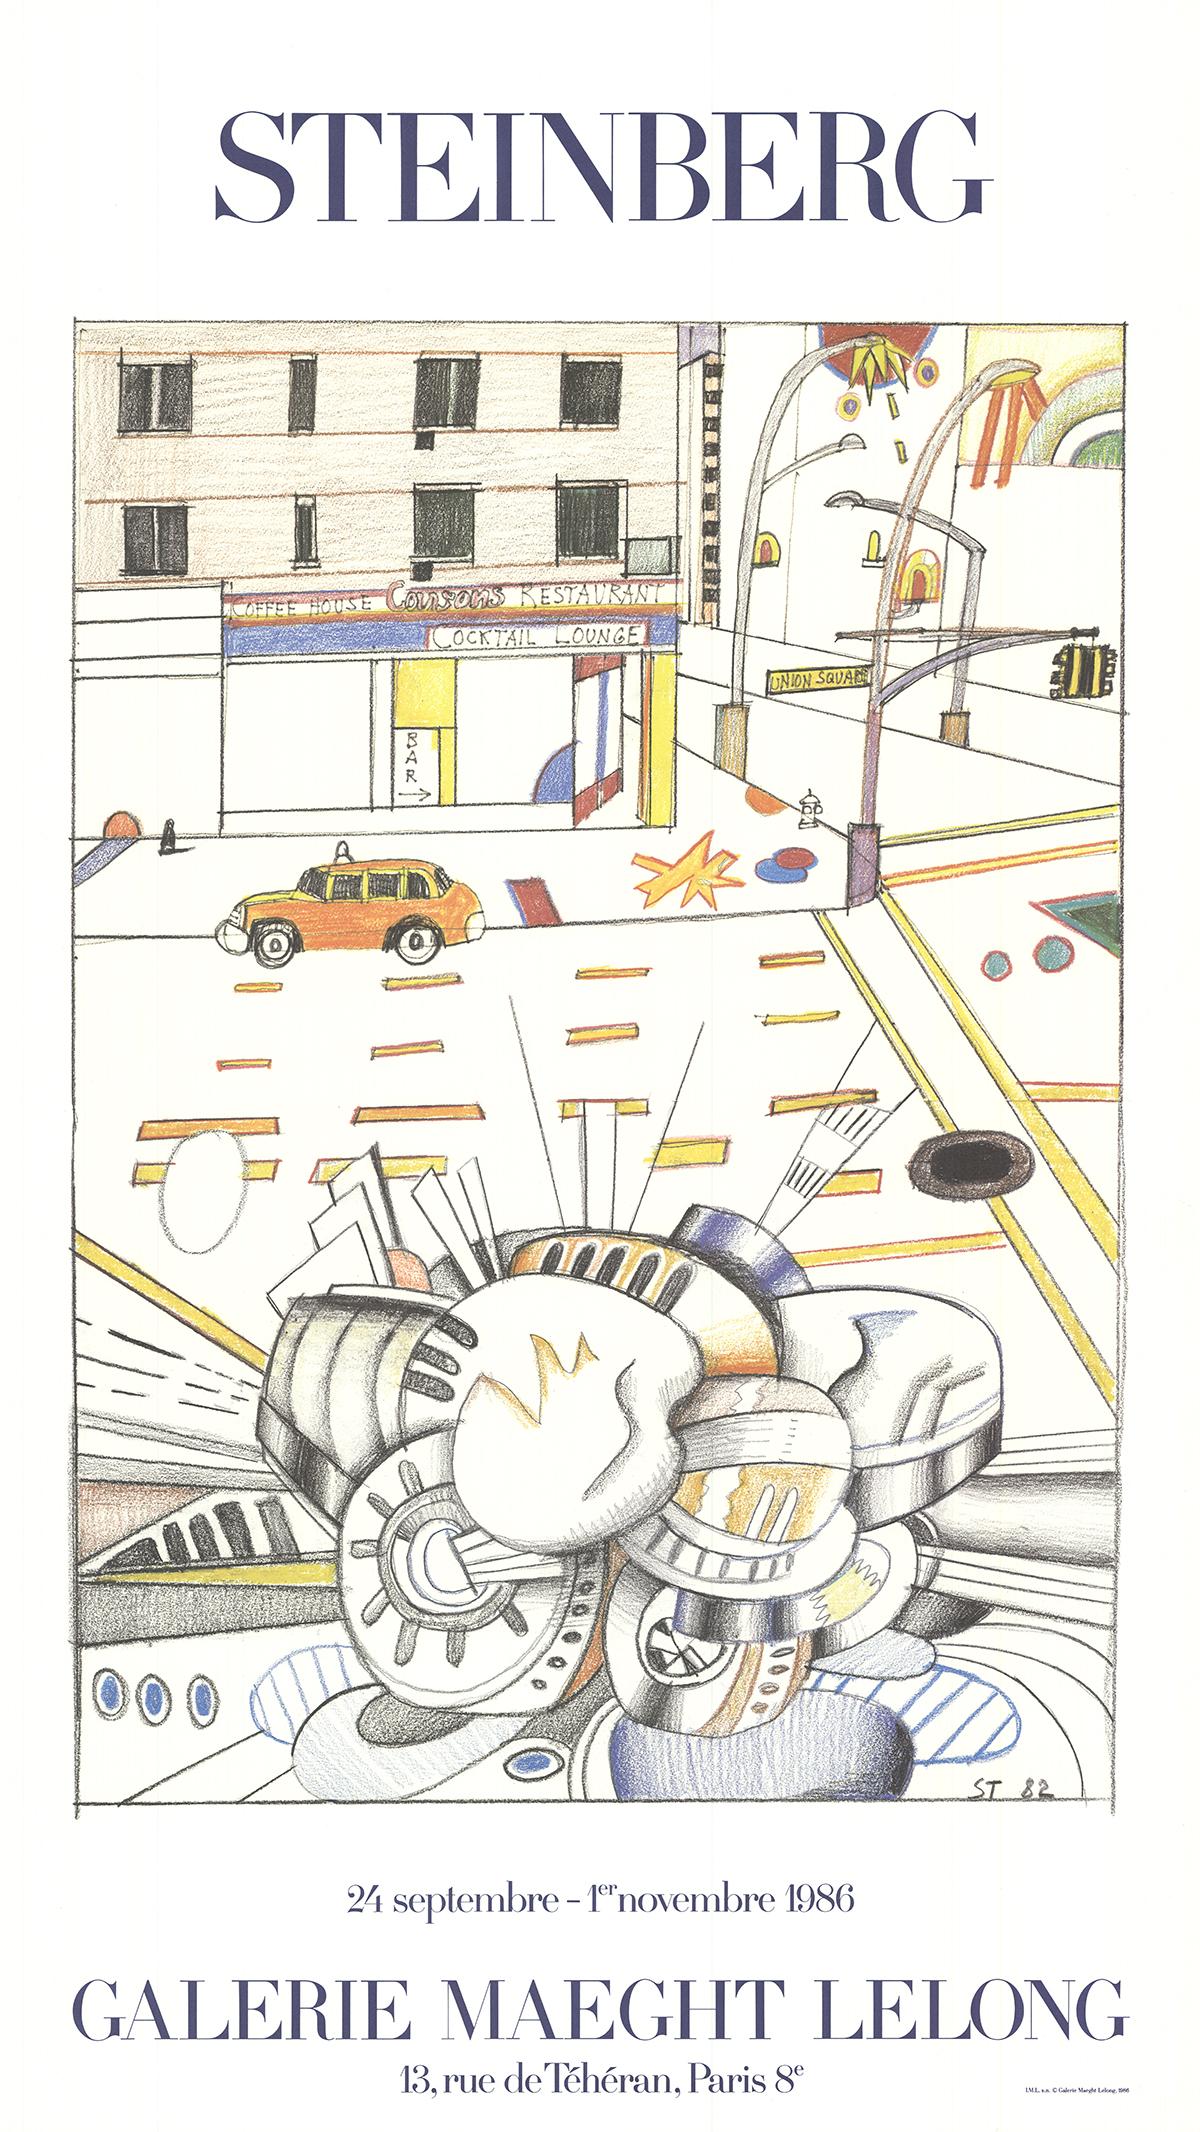 Cocktail Lounge-39.75" x 22.5" Exhibition Poster-1986 - Print by After Saul Steinberg